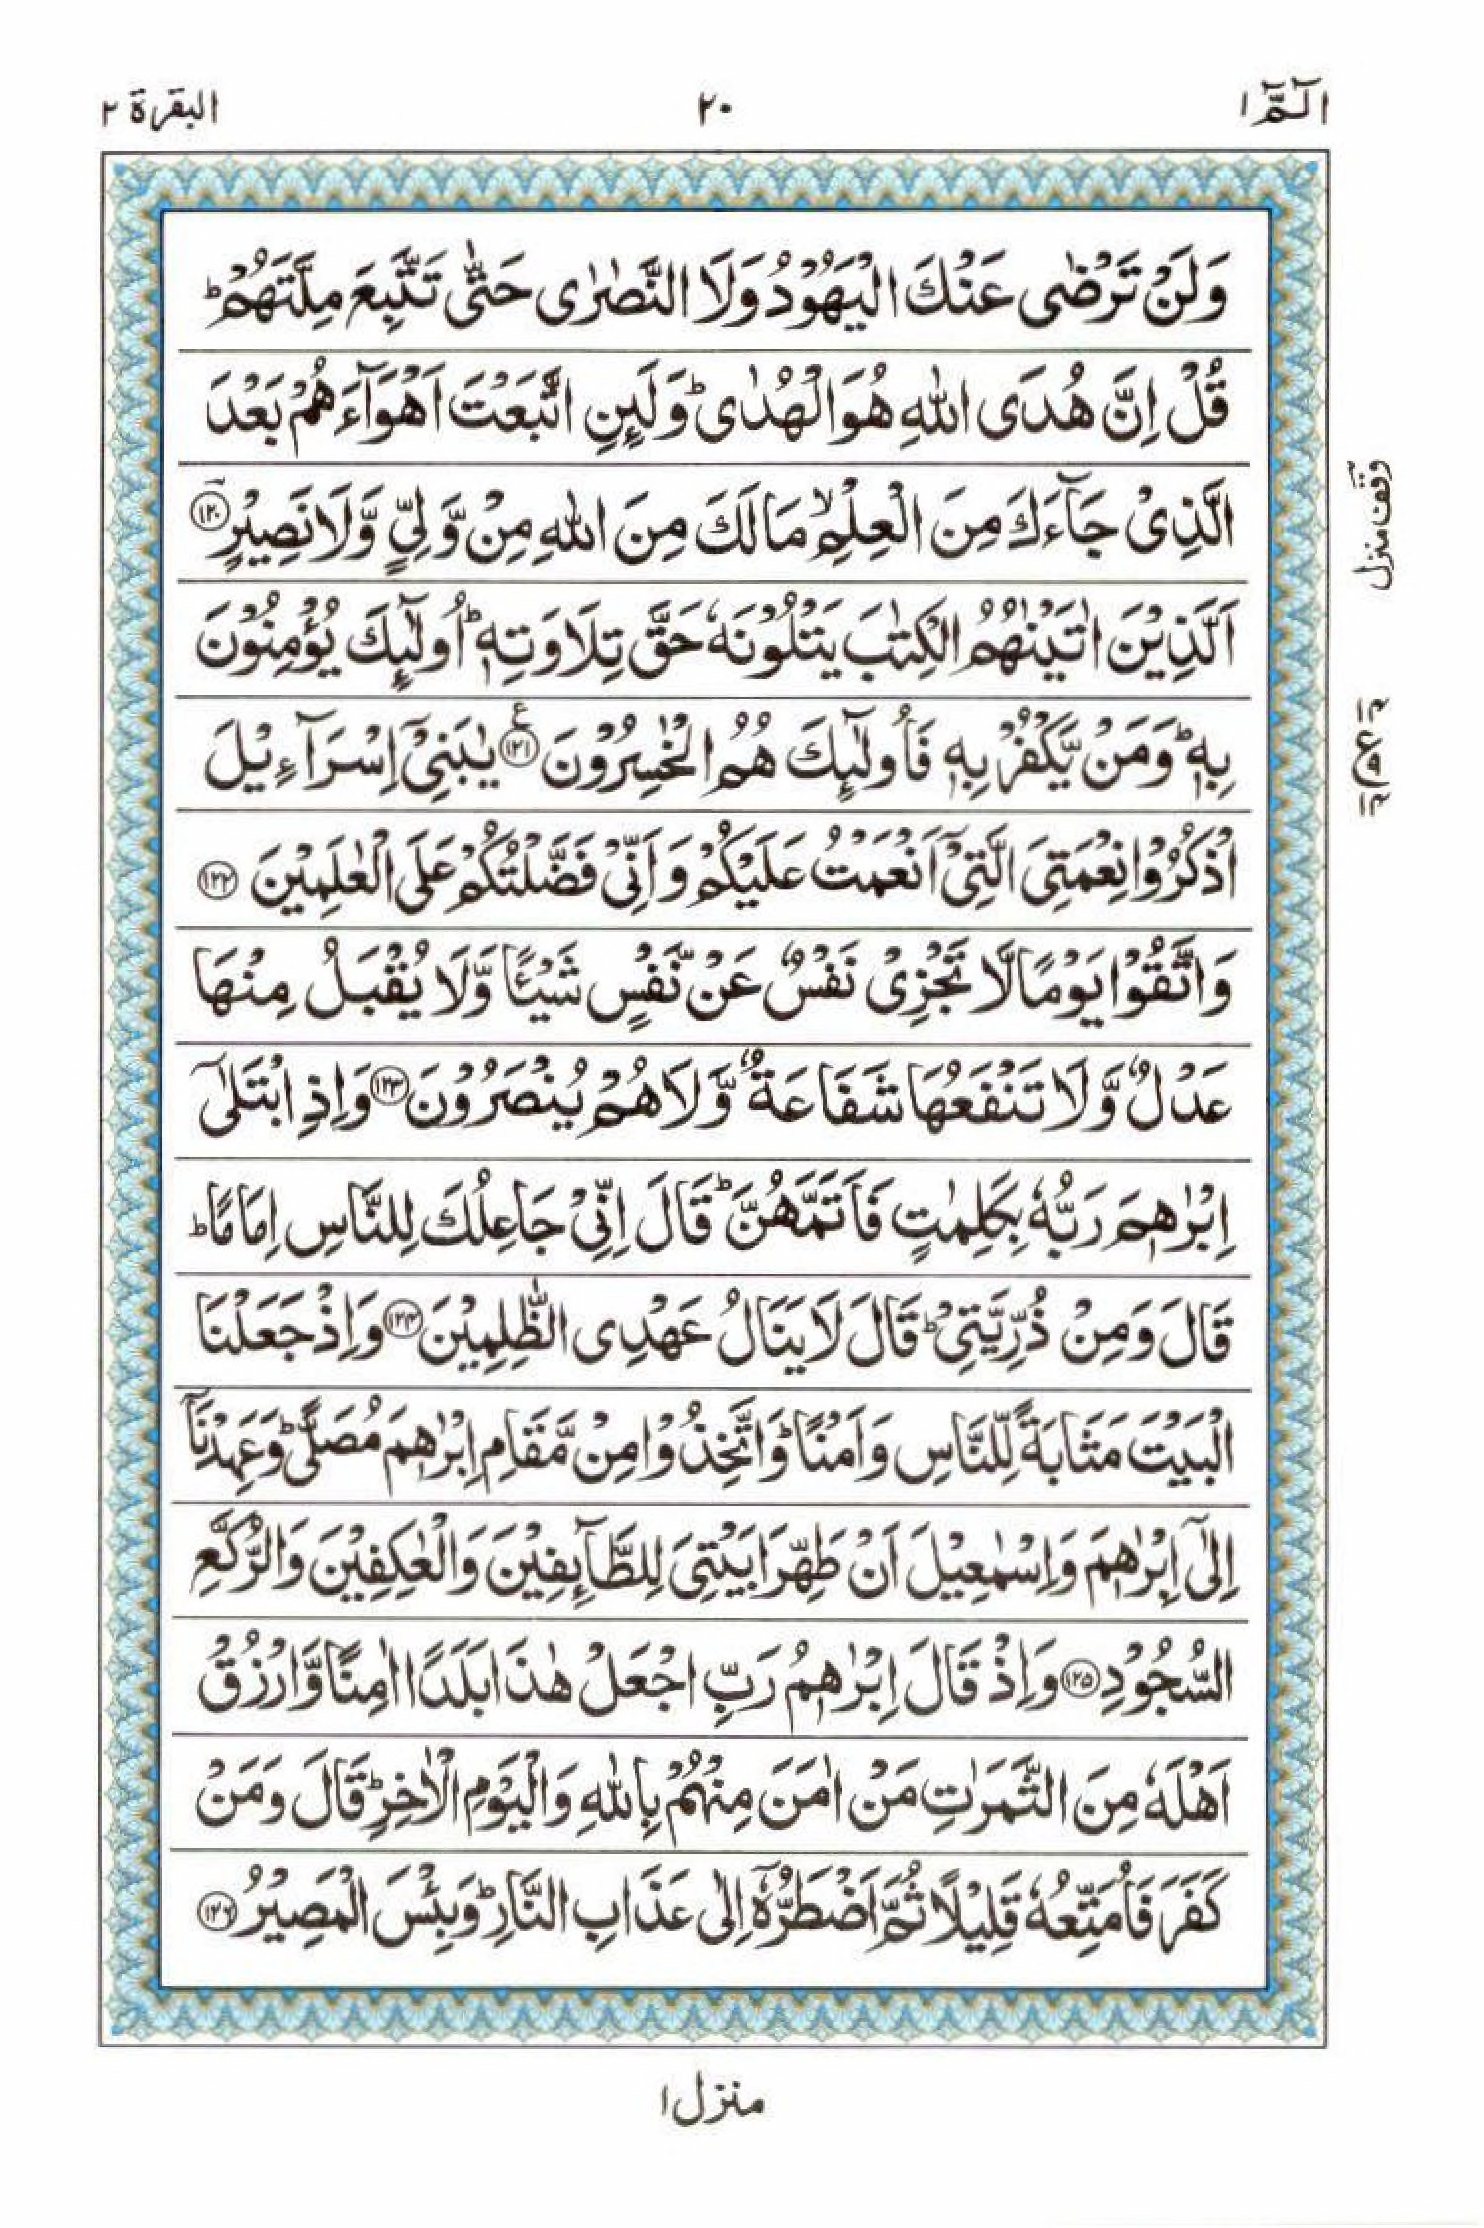 Read 15 Lines Quran, Part / Chapter / Siparah 1 Page 20